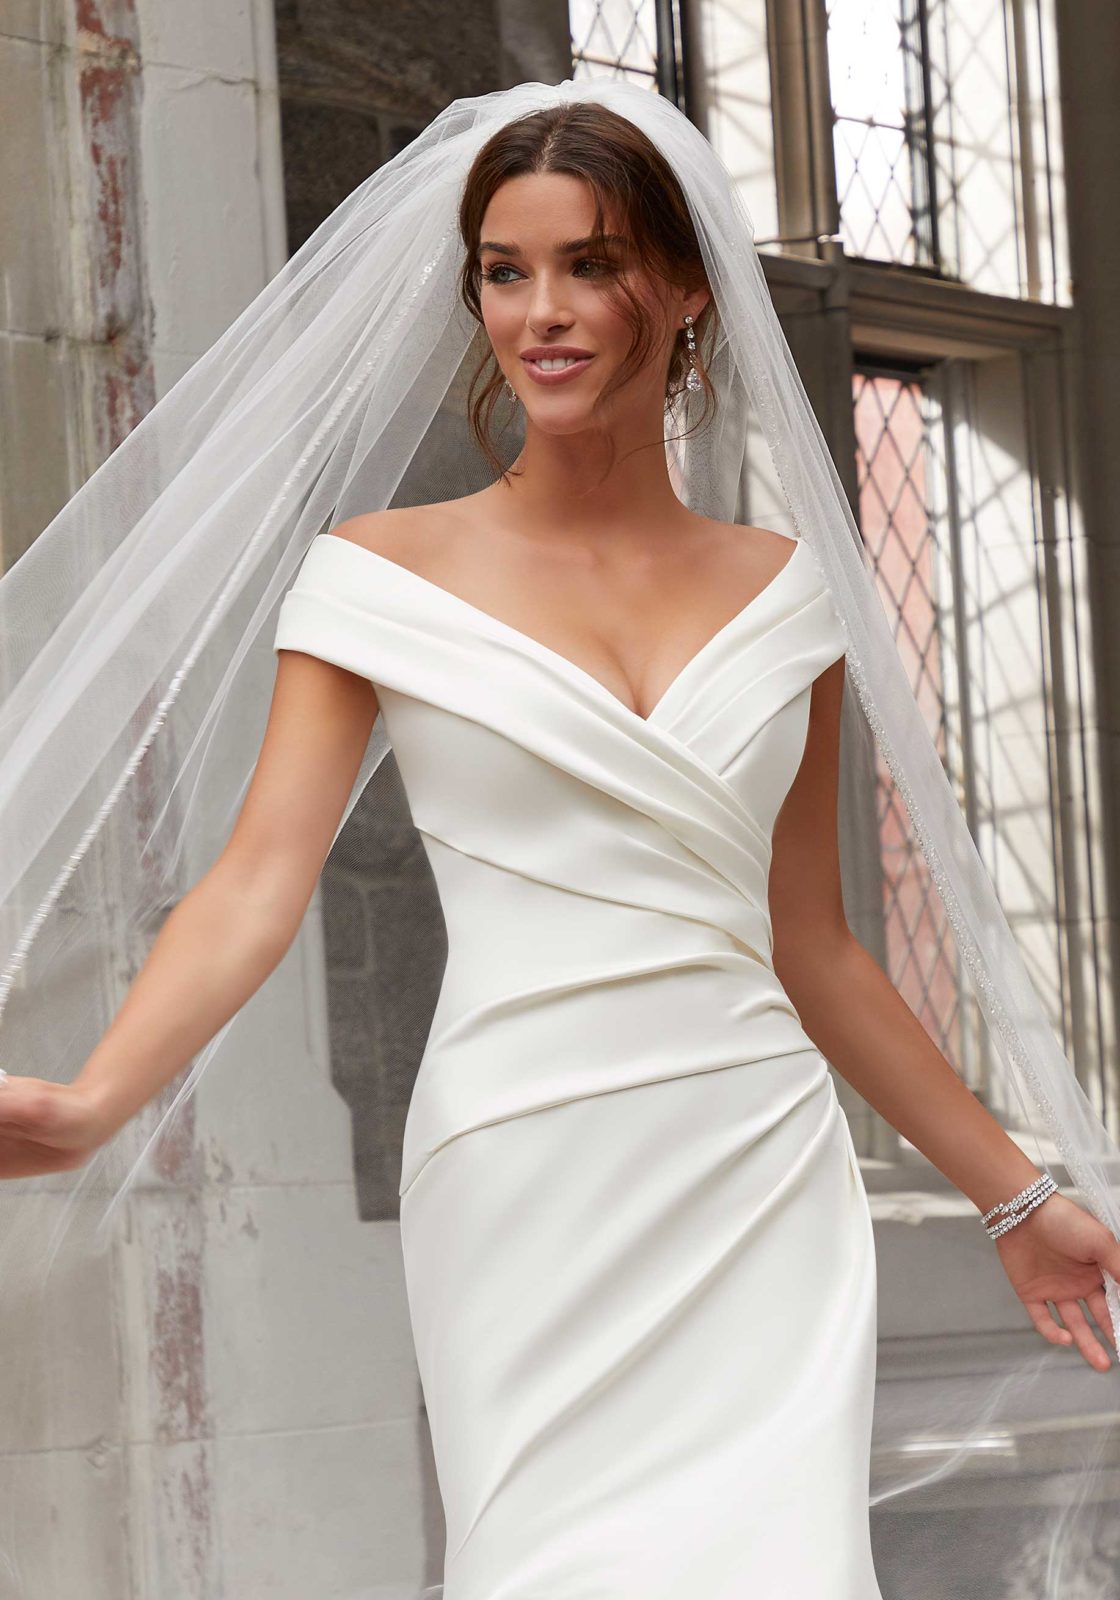 Stacey wedding dress by Morilee